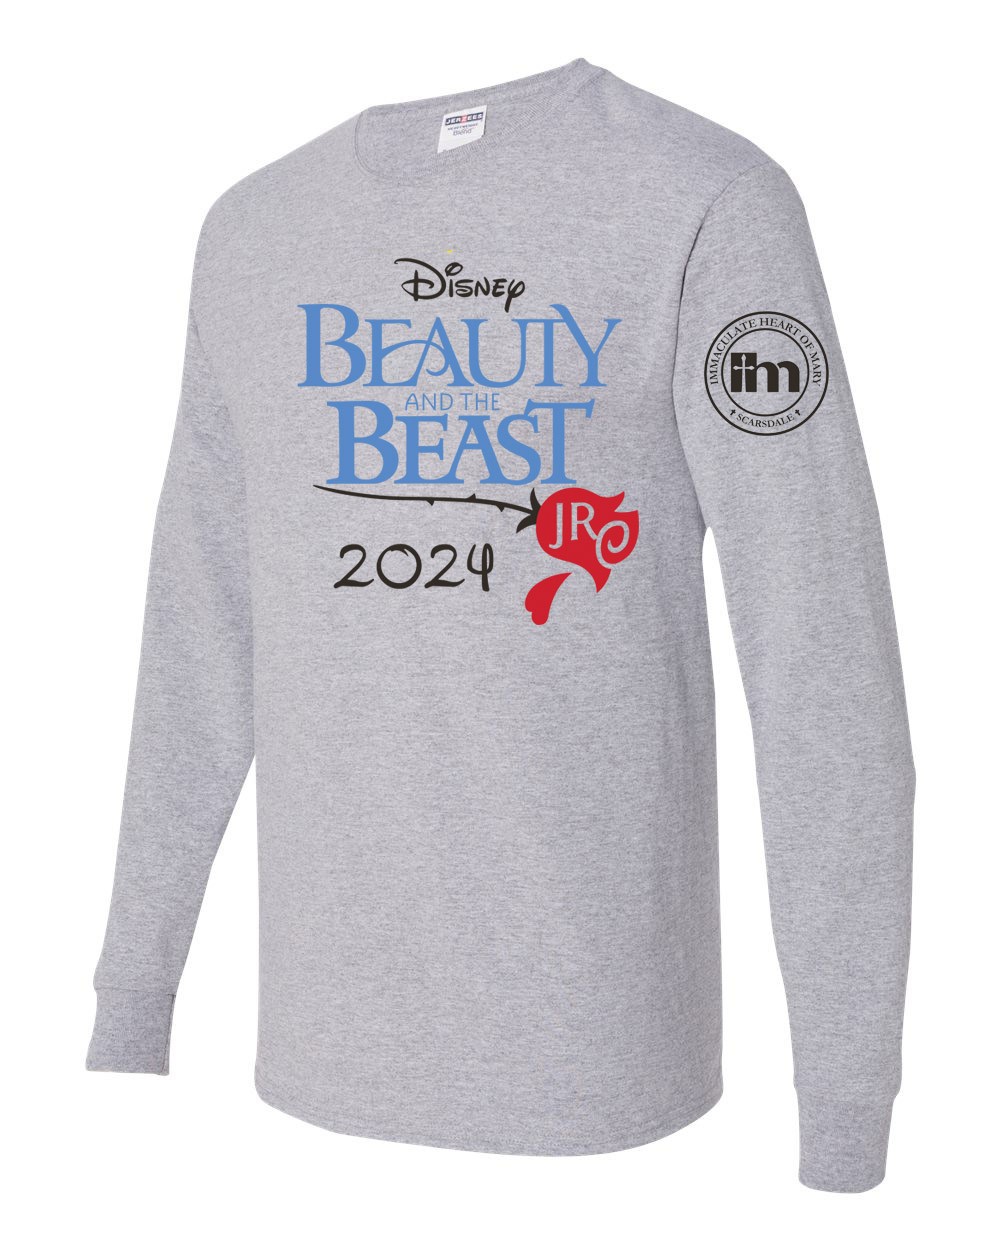 IHM Beauty and the Beast L/S T-shirt w/ Logo - Please Allow 2-3 Weeks for Delivery